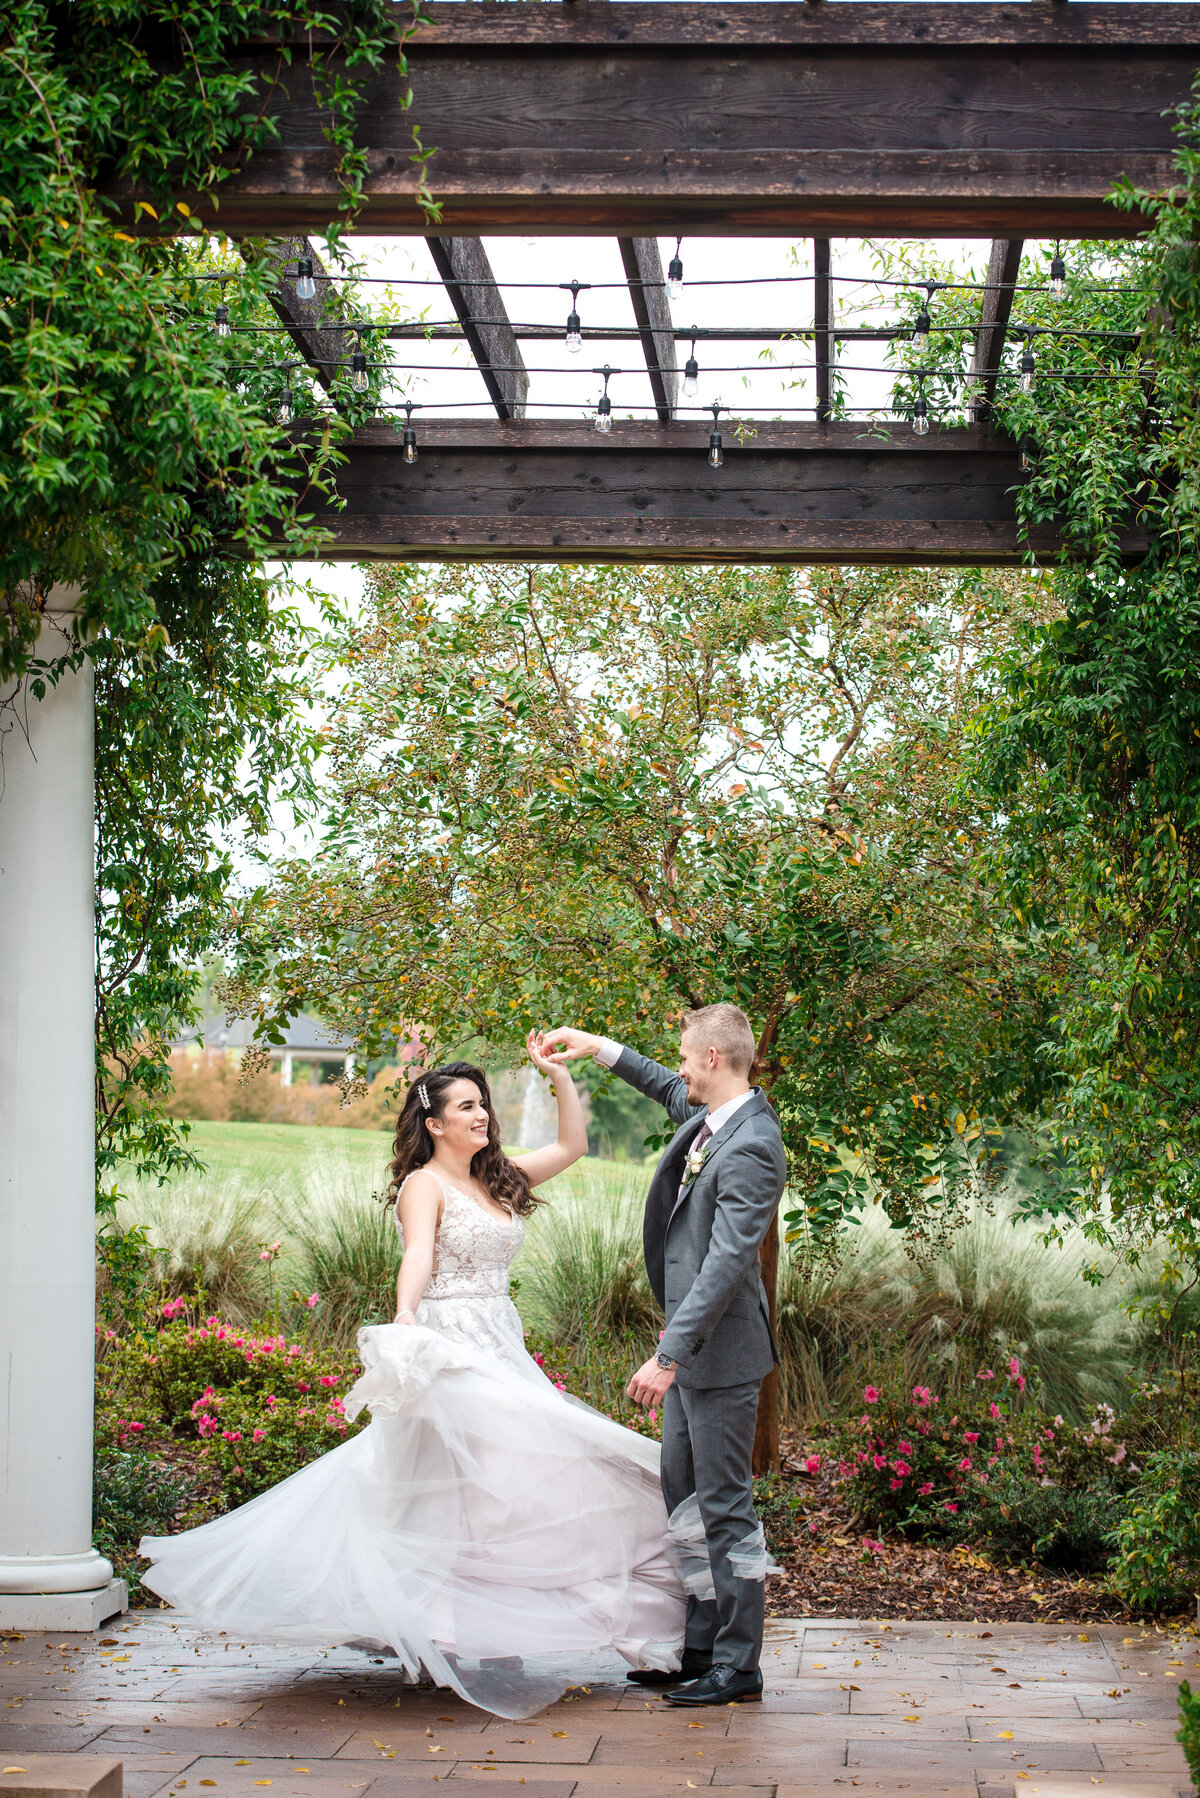 Russian bride and groom dancing outdoors under the pergola at the Ballantyne Hotel by Charlotte wedding photographers DeLong Photography